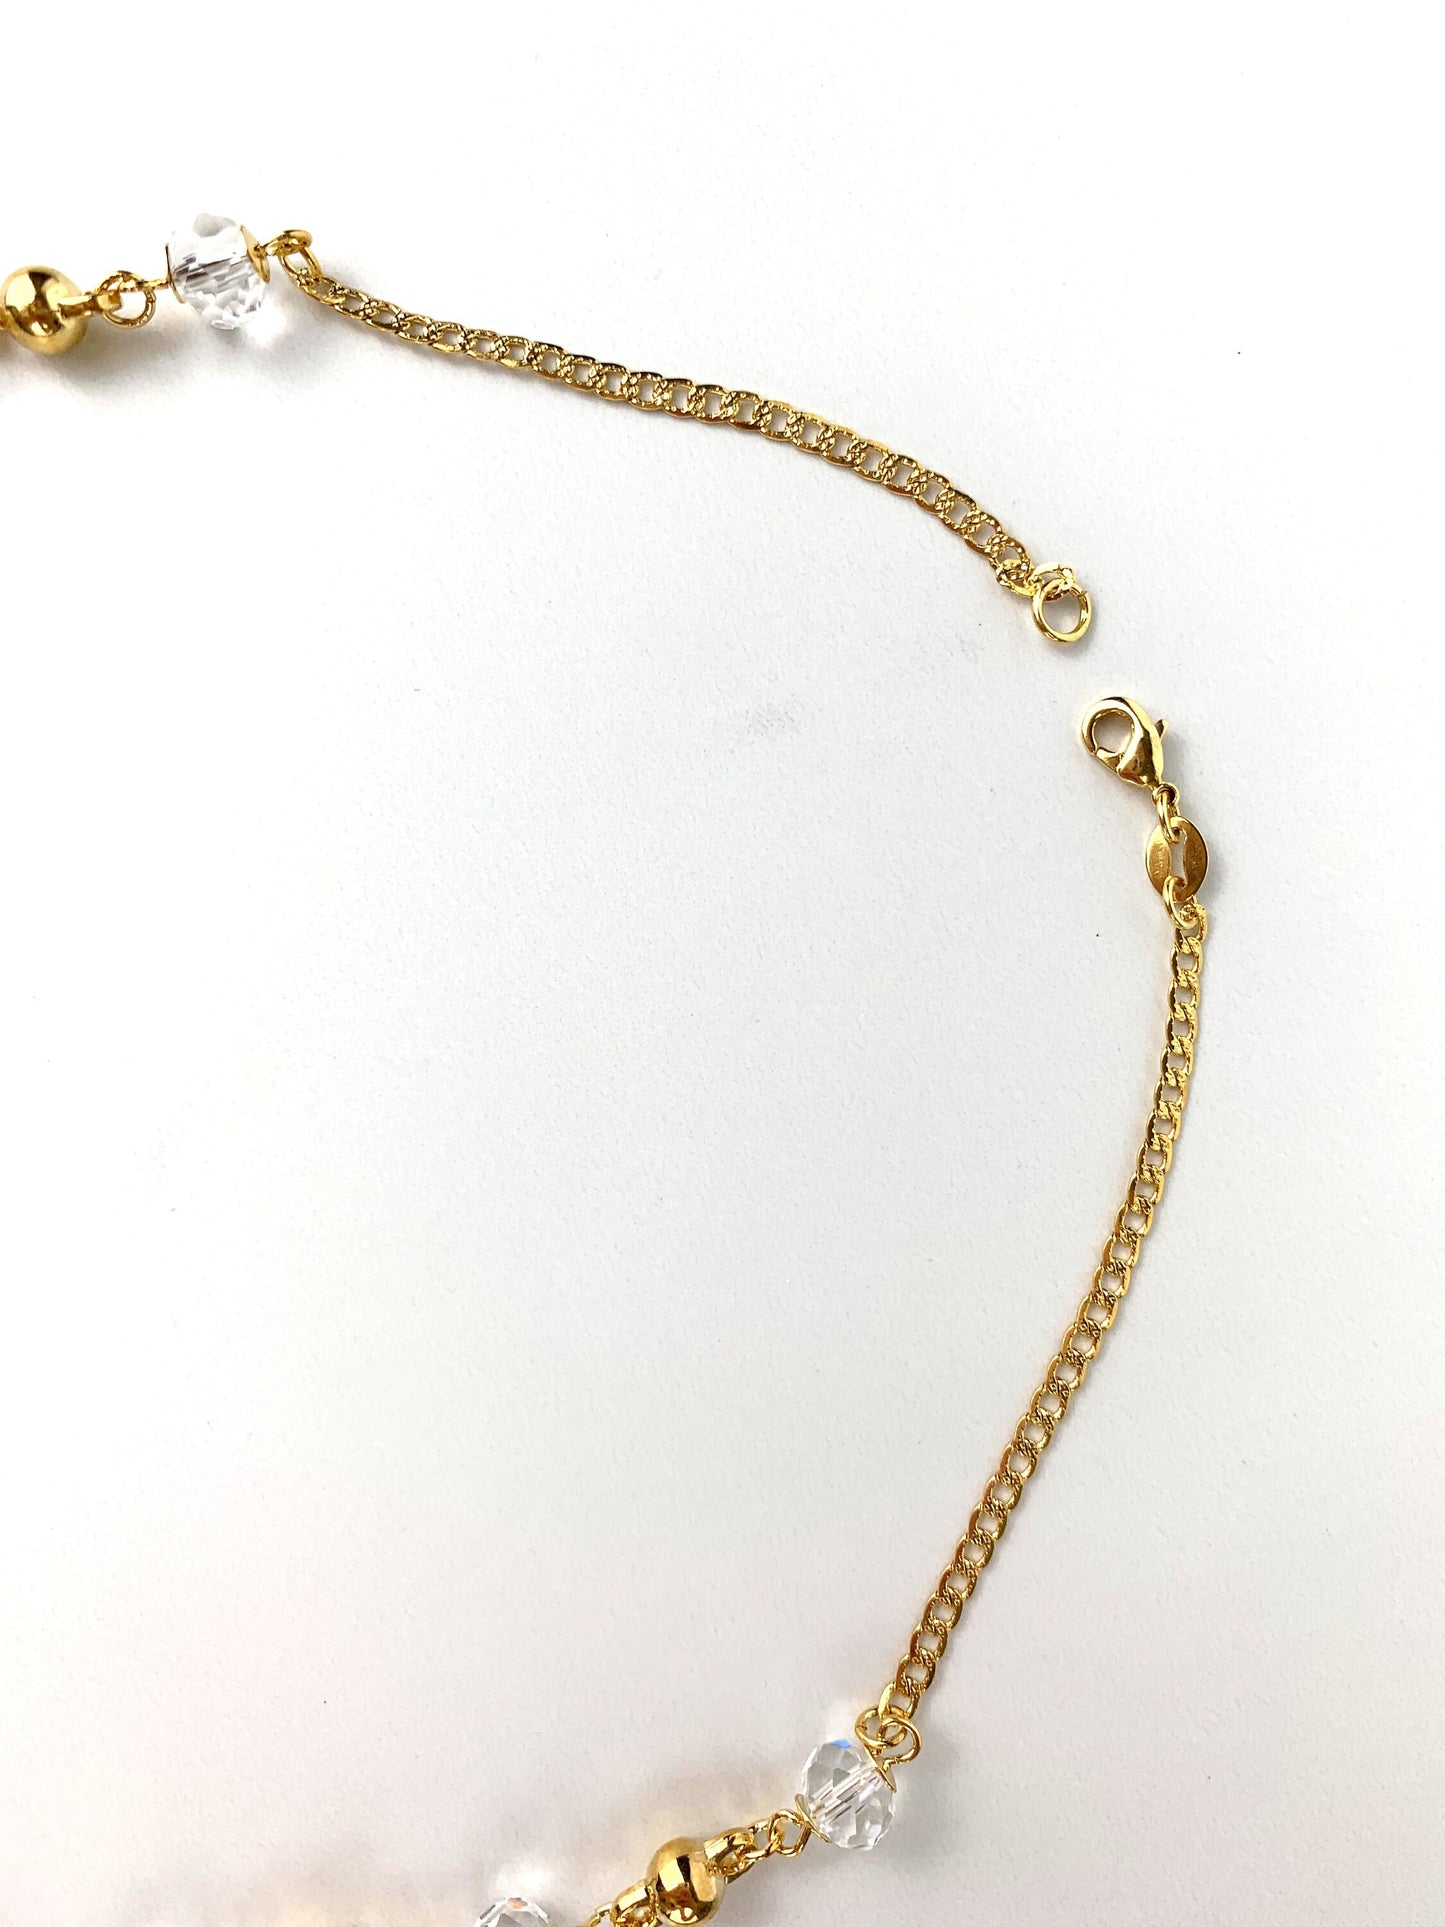 18k Gold Filled Curb Link Chain with Clear Beads and Gold Balls Linked Necklace For Wholesale and Jewelry Supplies